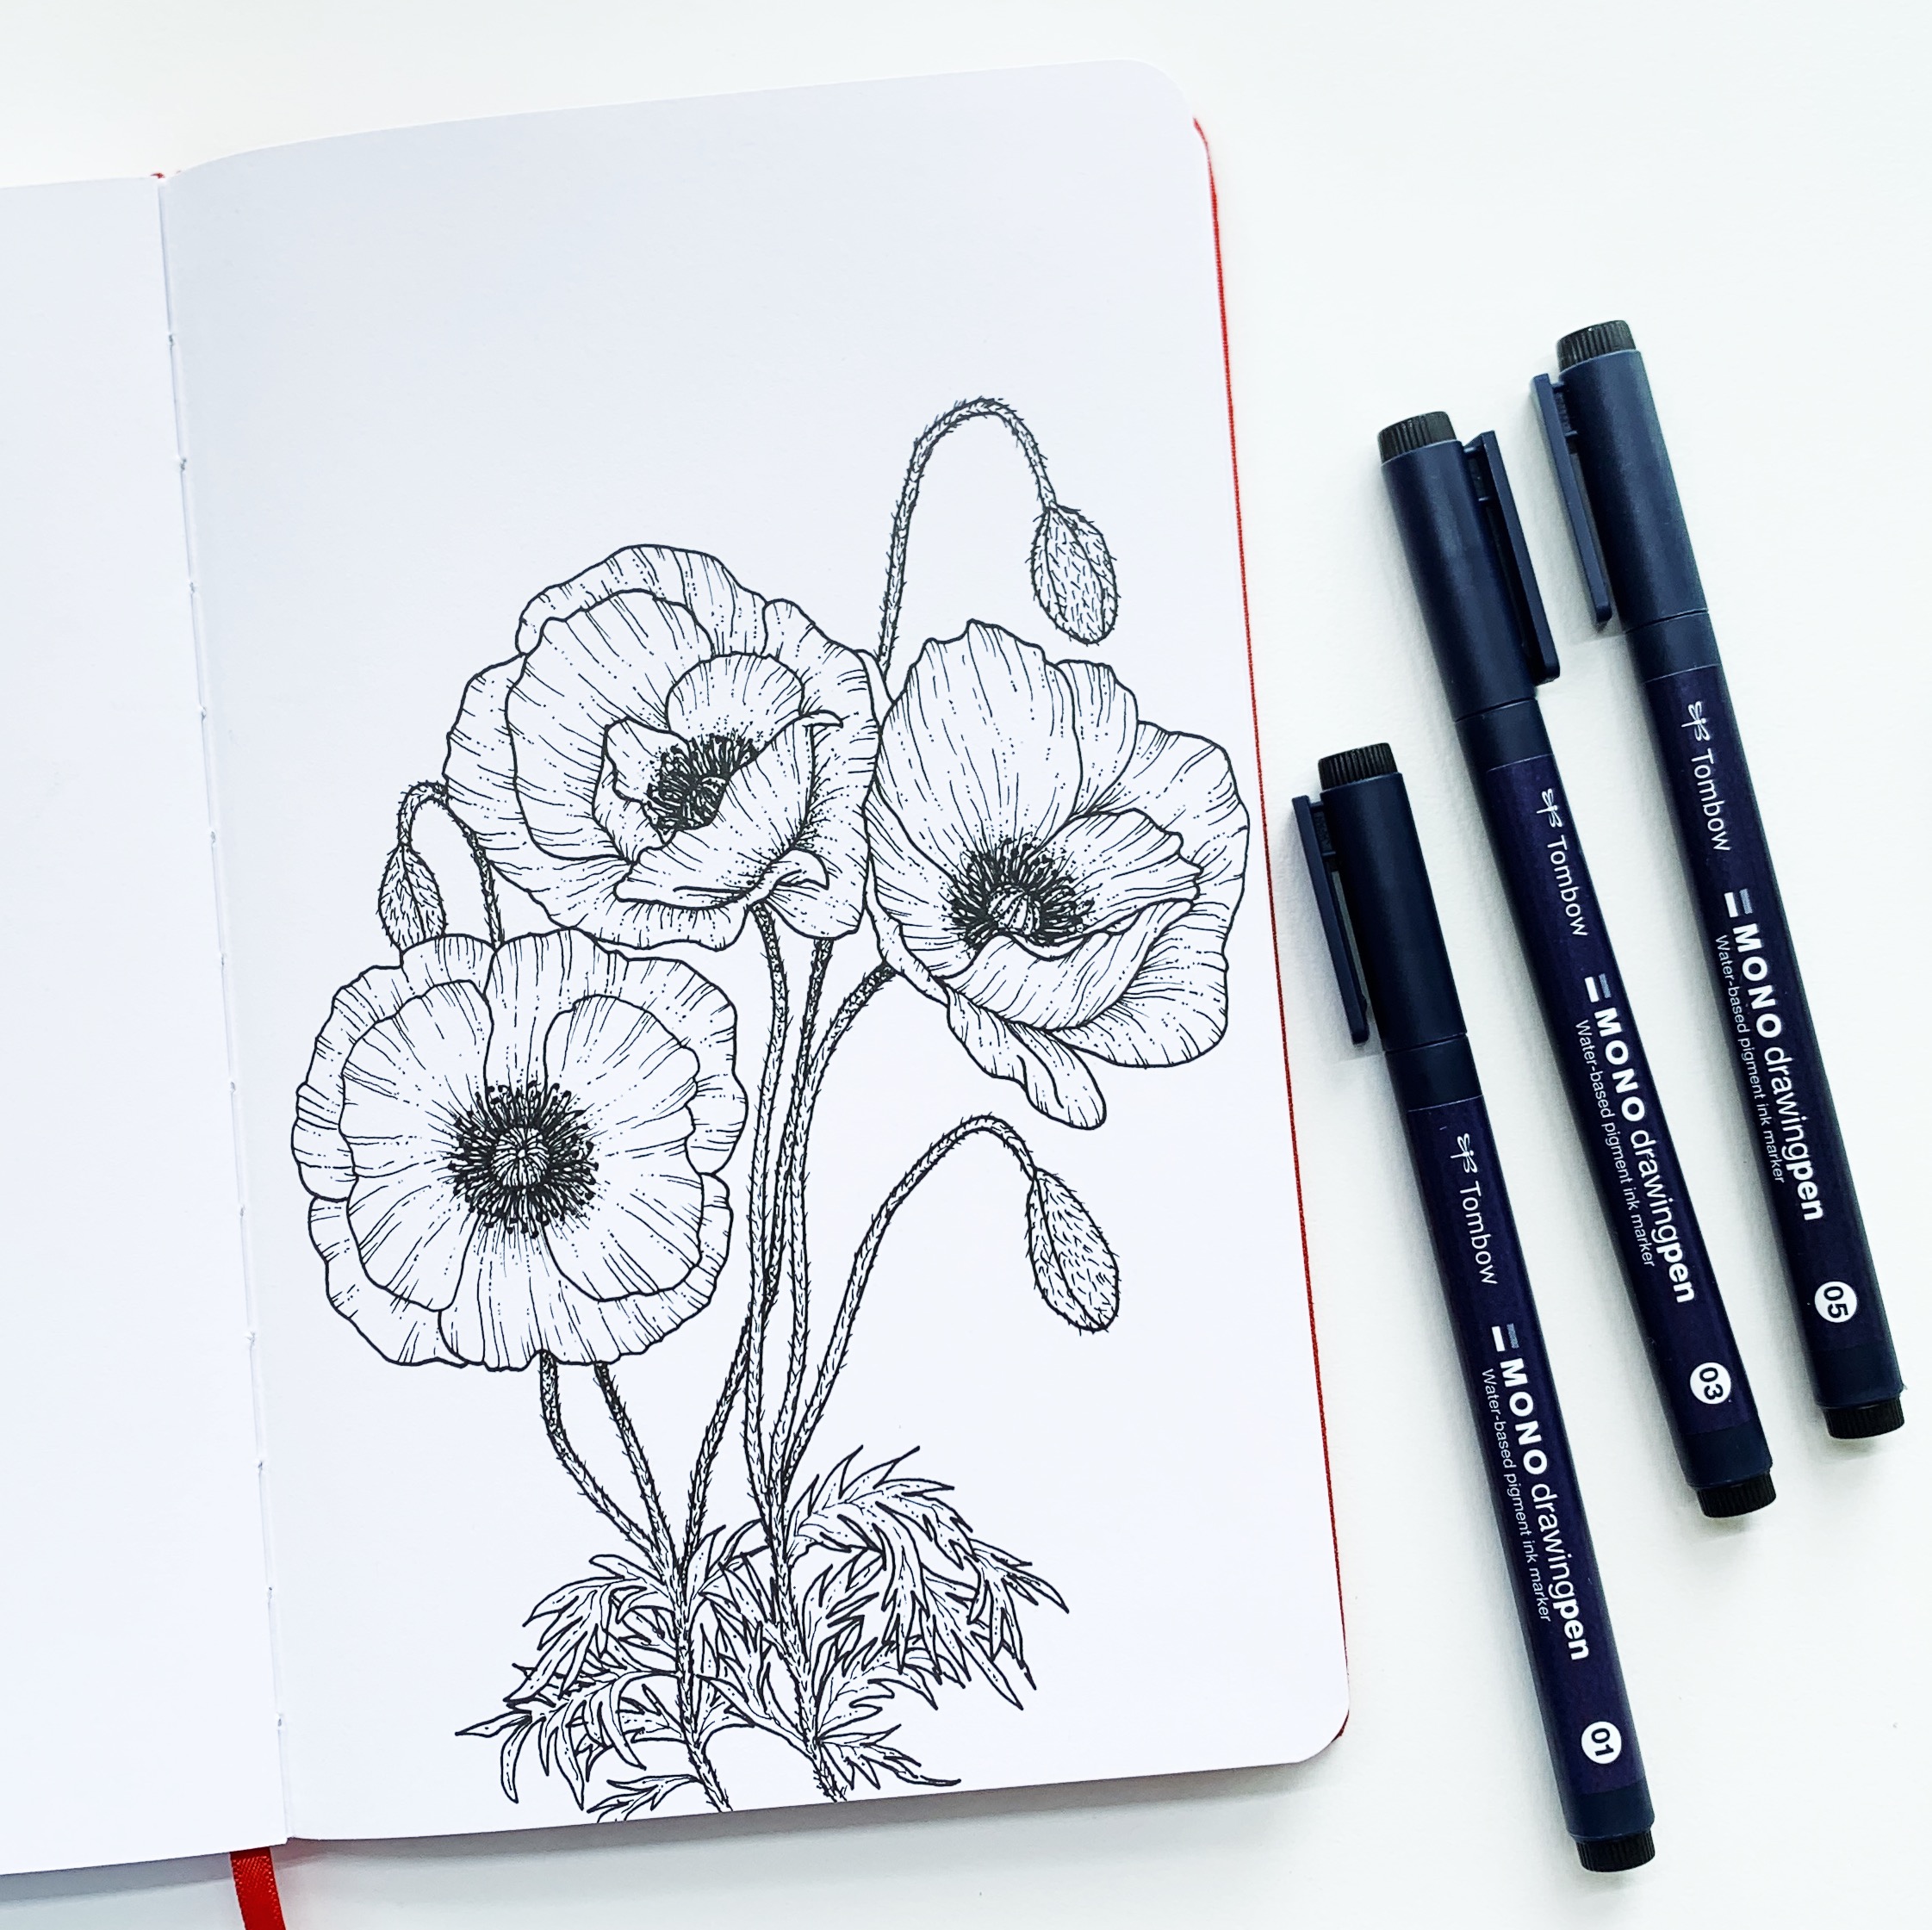 How to Doodle: 6 Plants to Draw! - Tombow USA Blog